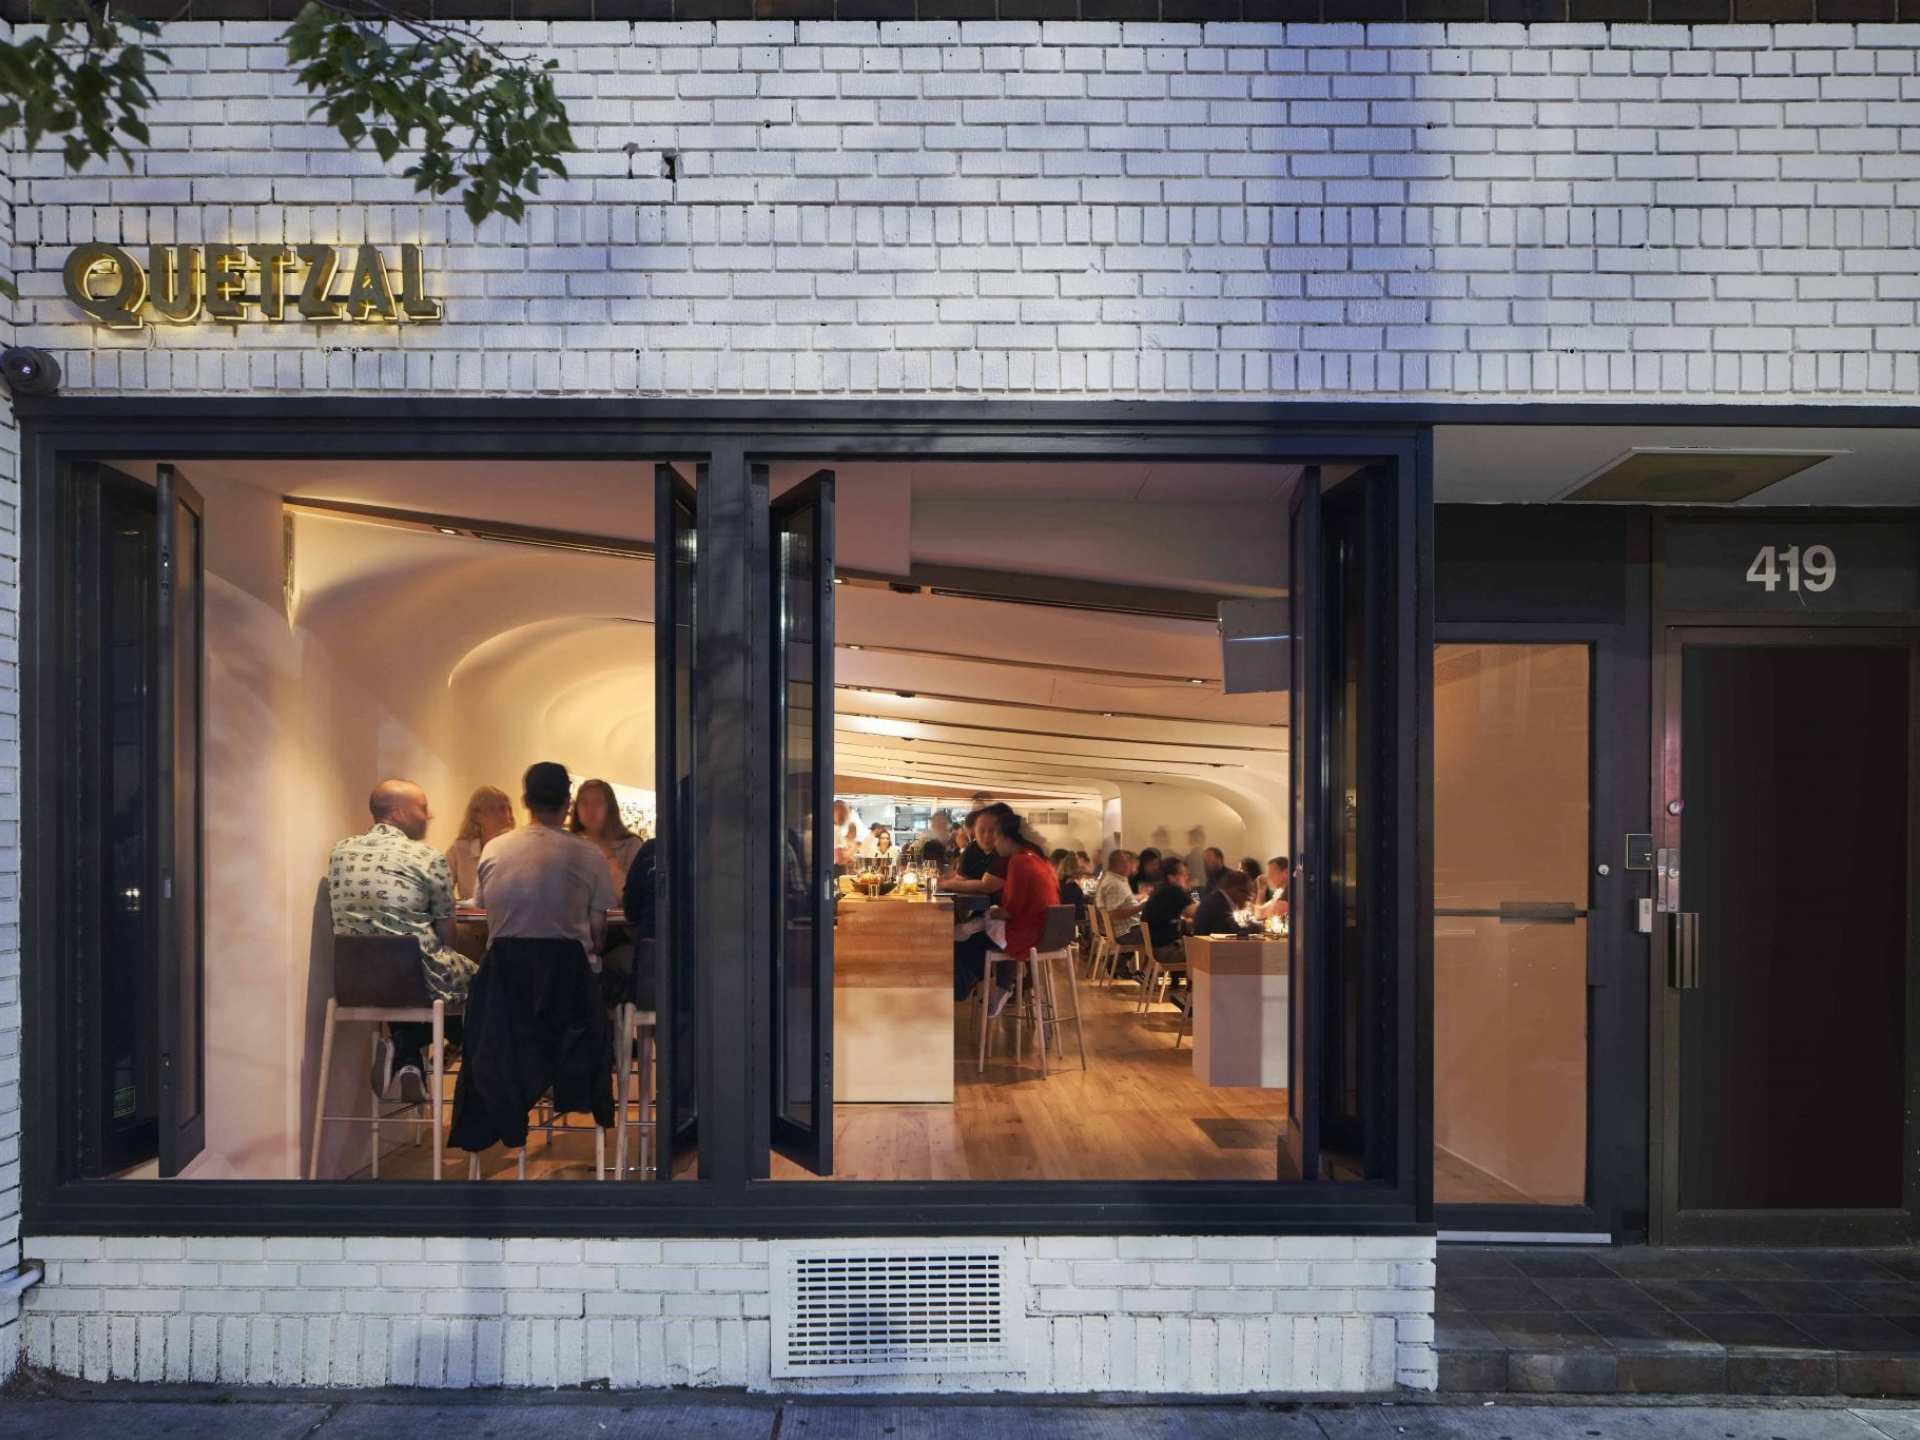 Embers Toronto | The exterior of Quetzal, which will host the first Embers dinner on April 14